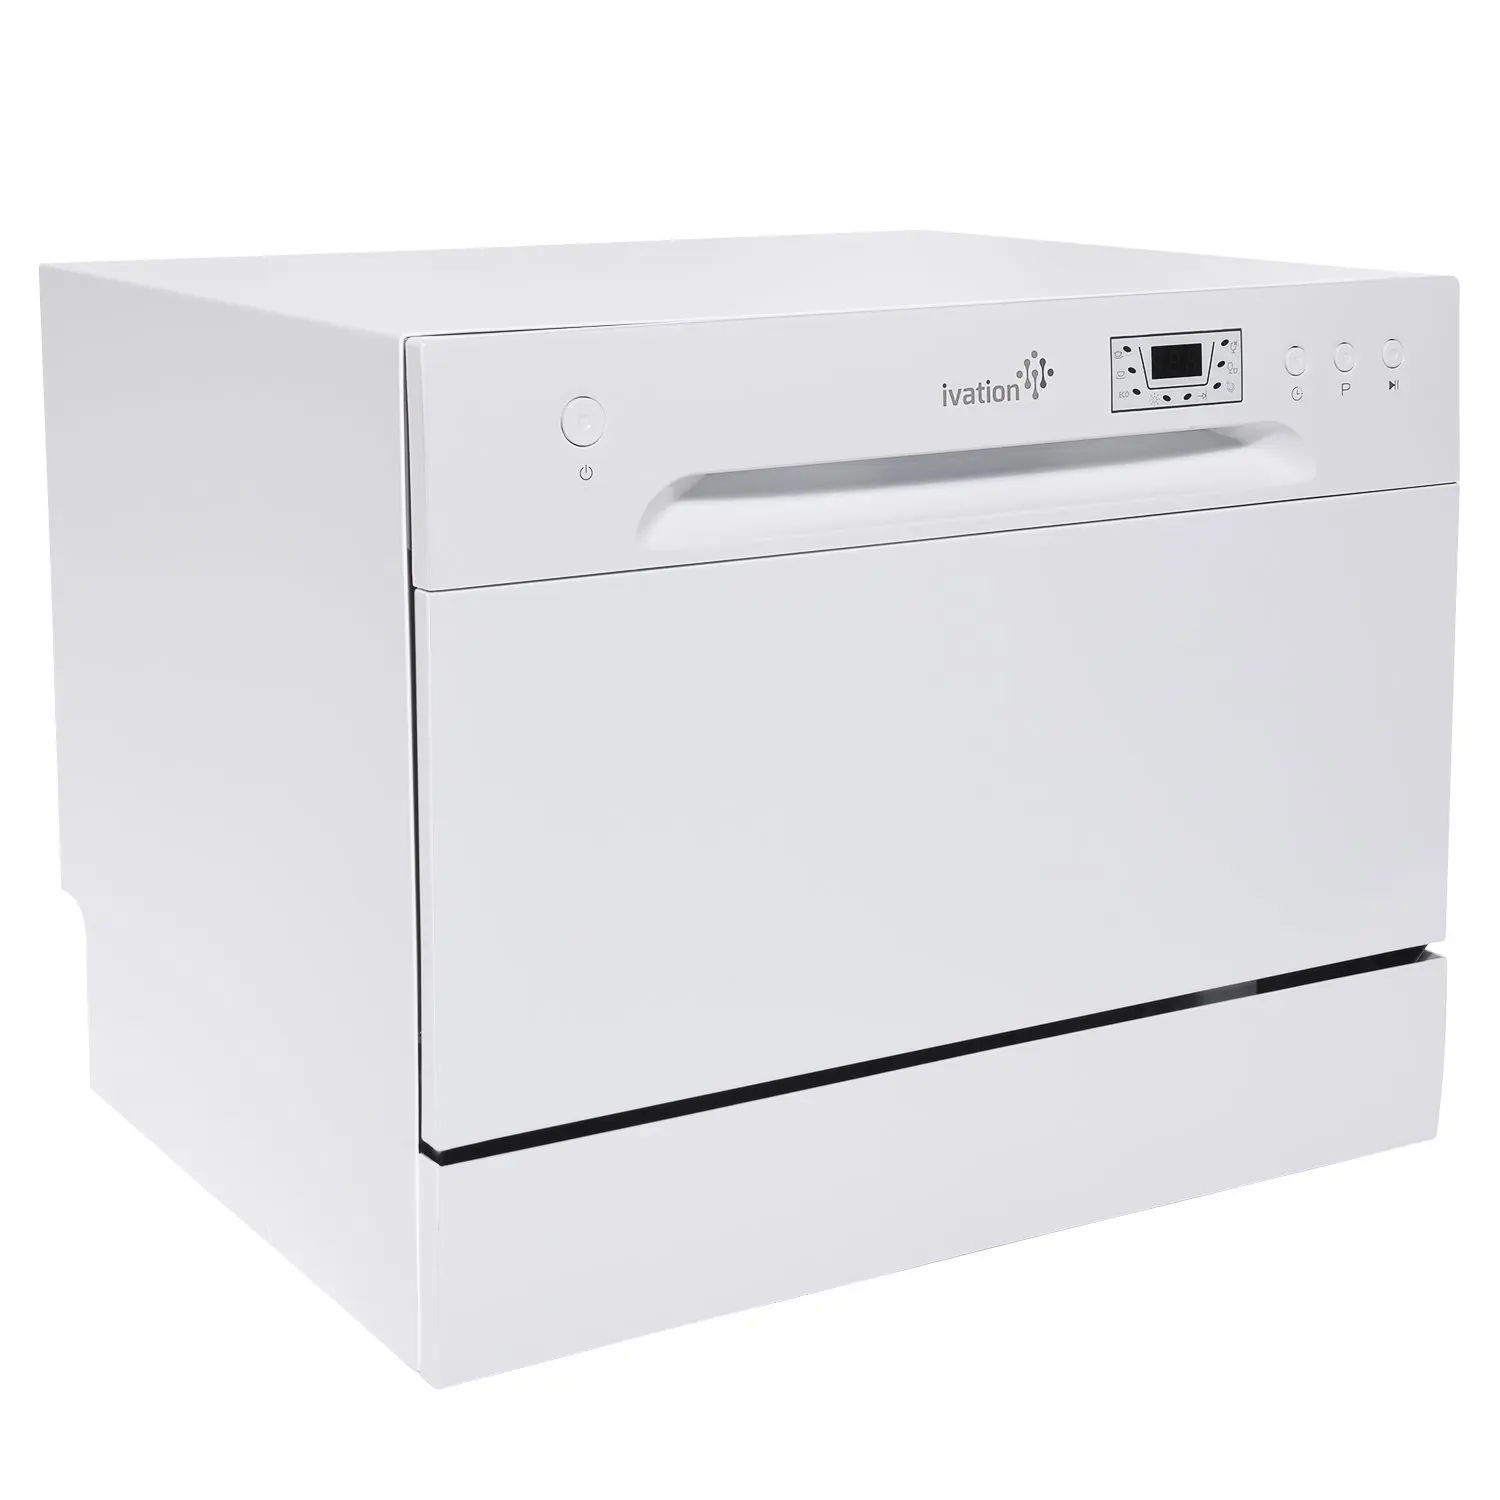 Cheap Lowes Portable Dishwasher Find Lowes Portable Dishwasher